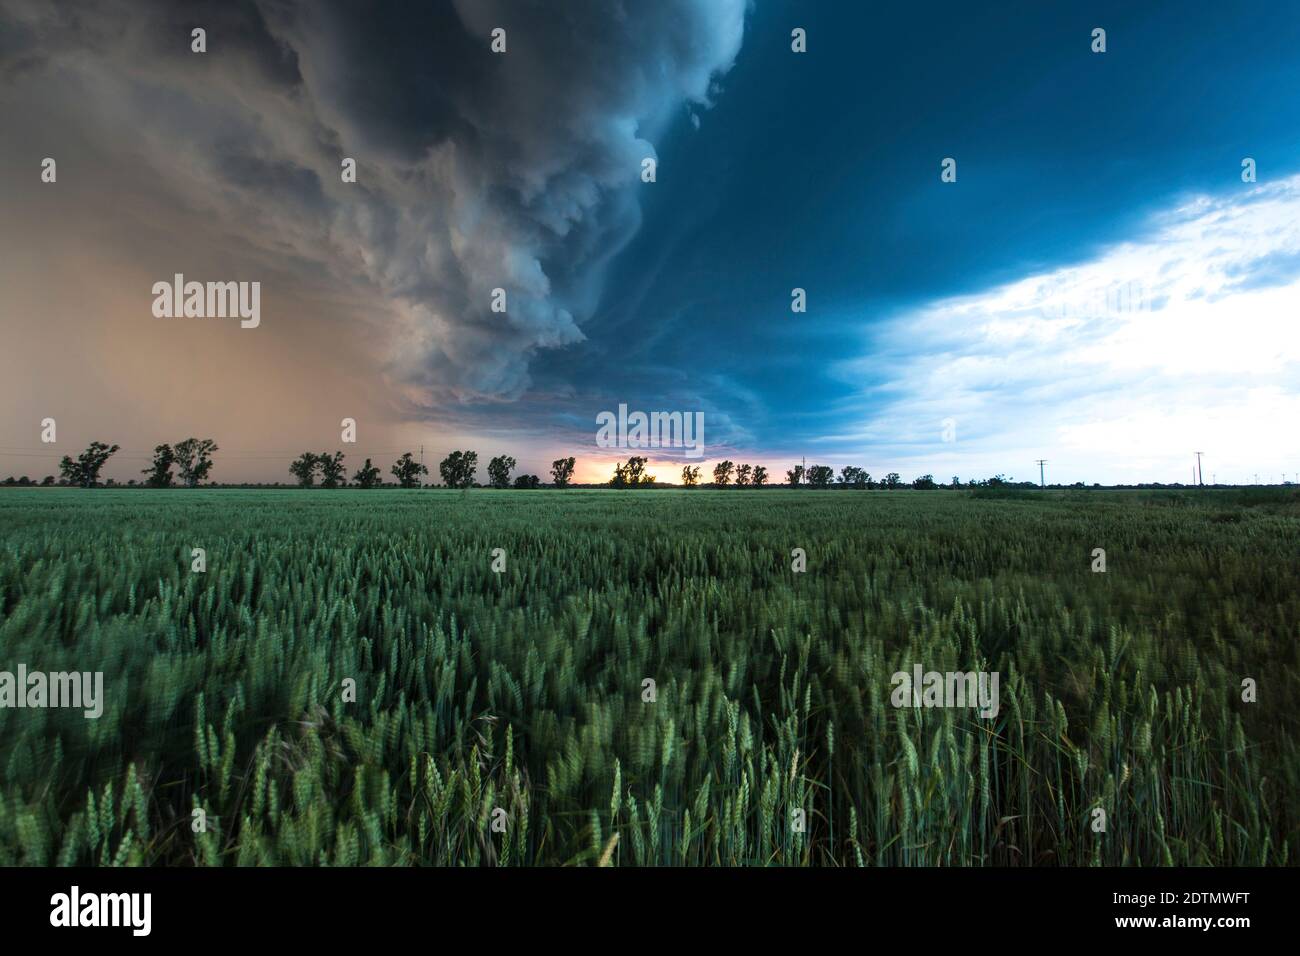 Thunderstorm over a field Stock Photo